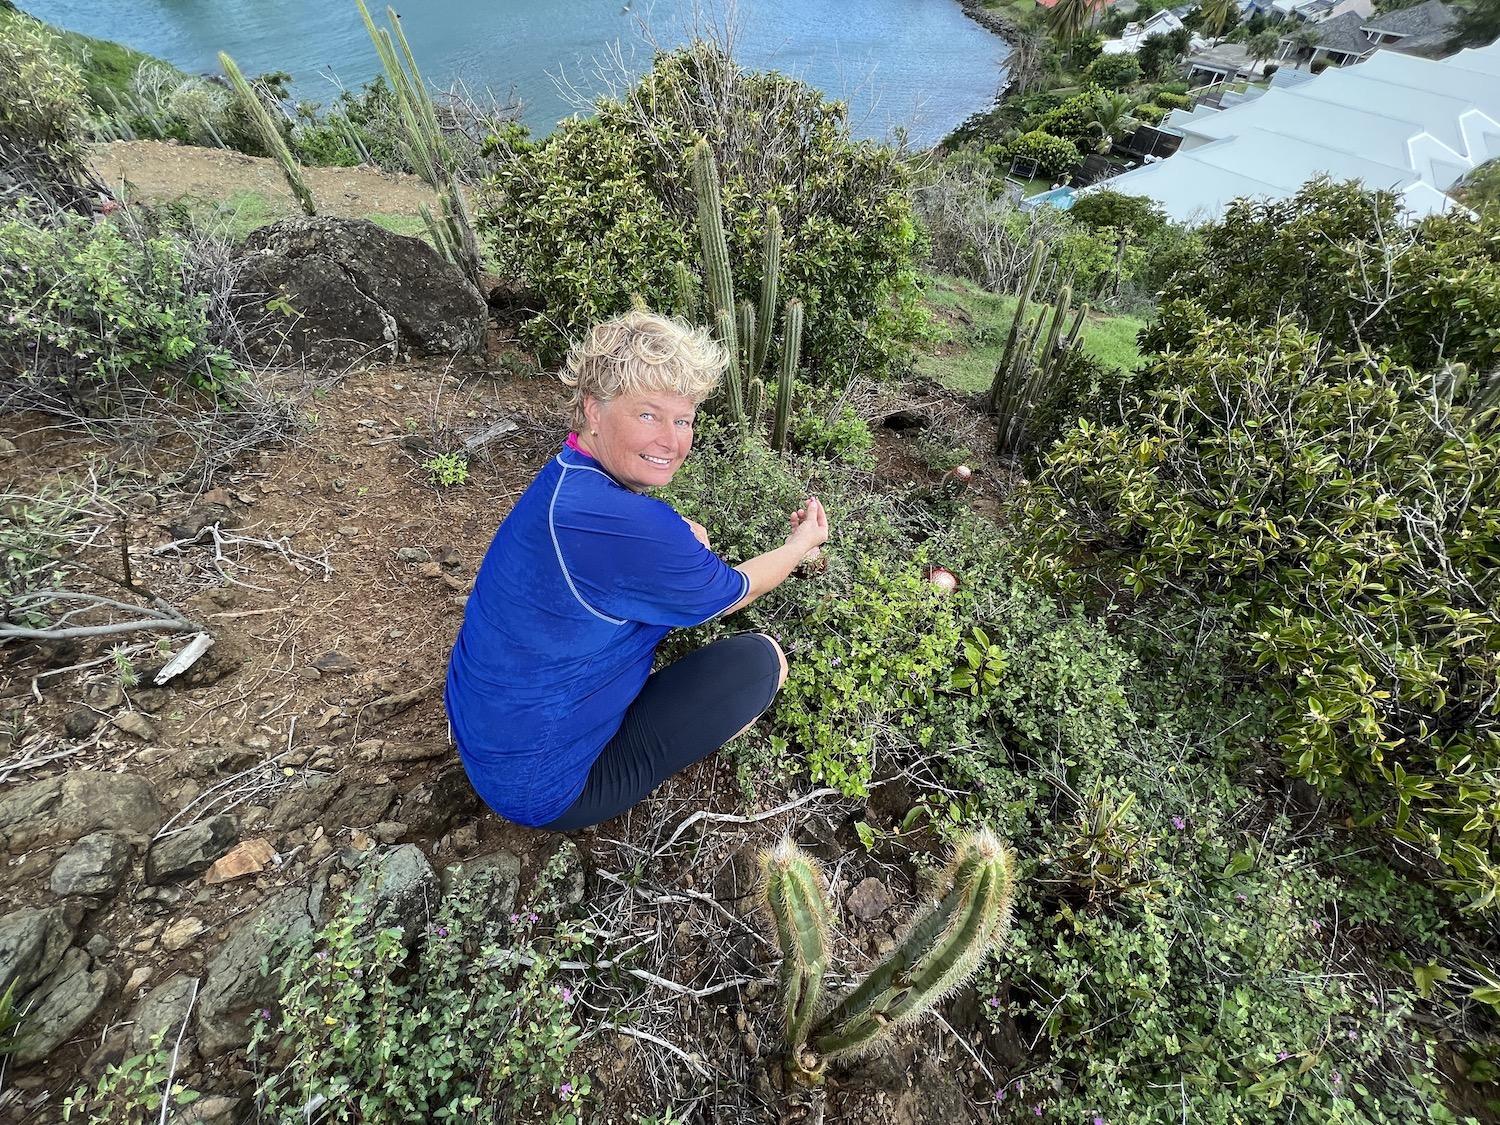 Rikke Bachmann Speetjens, a guide with Seagrape Tours, shows off the biodiversity of Babit Point.